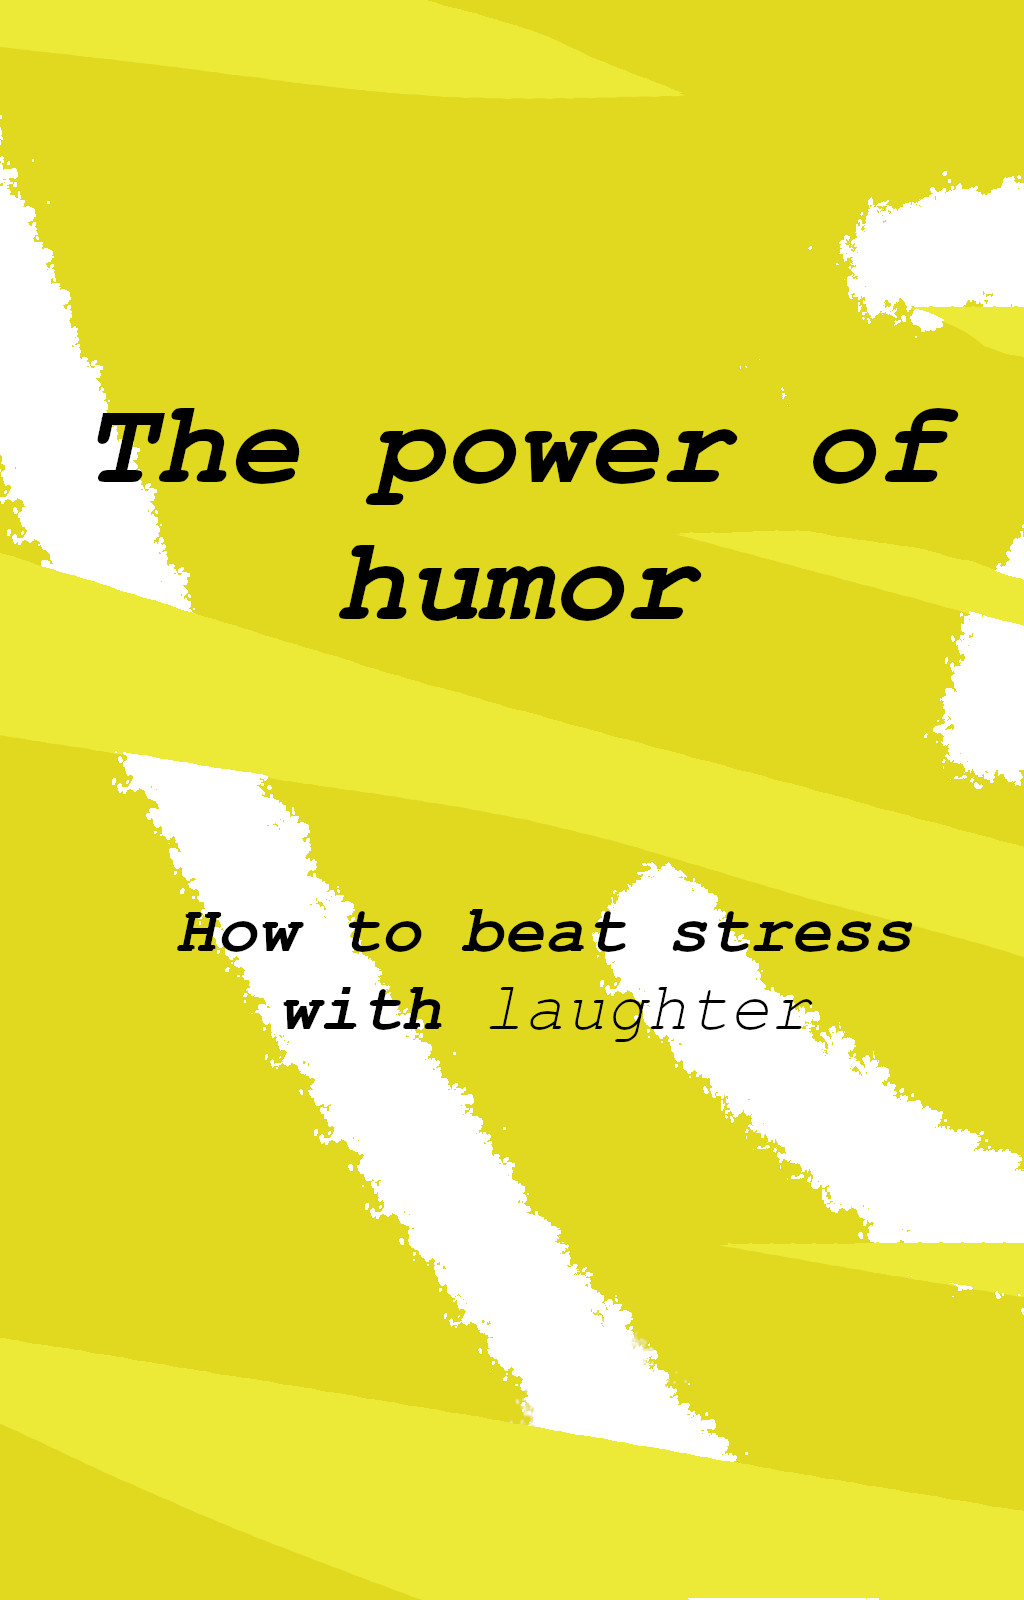 FREE: The power of humor: How to beat stress with laughter by Marek porubský